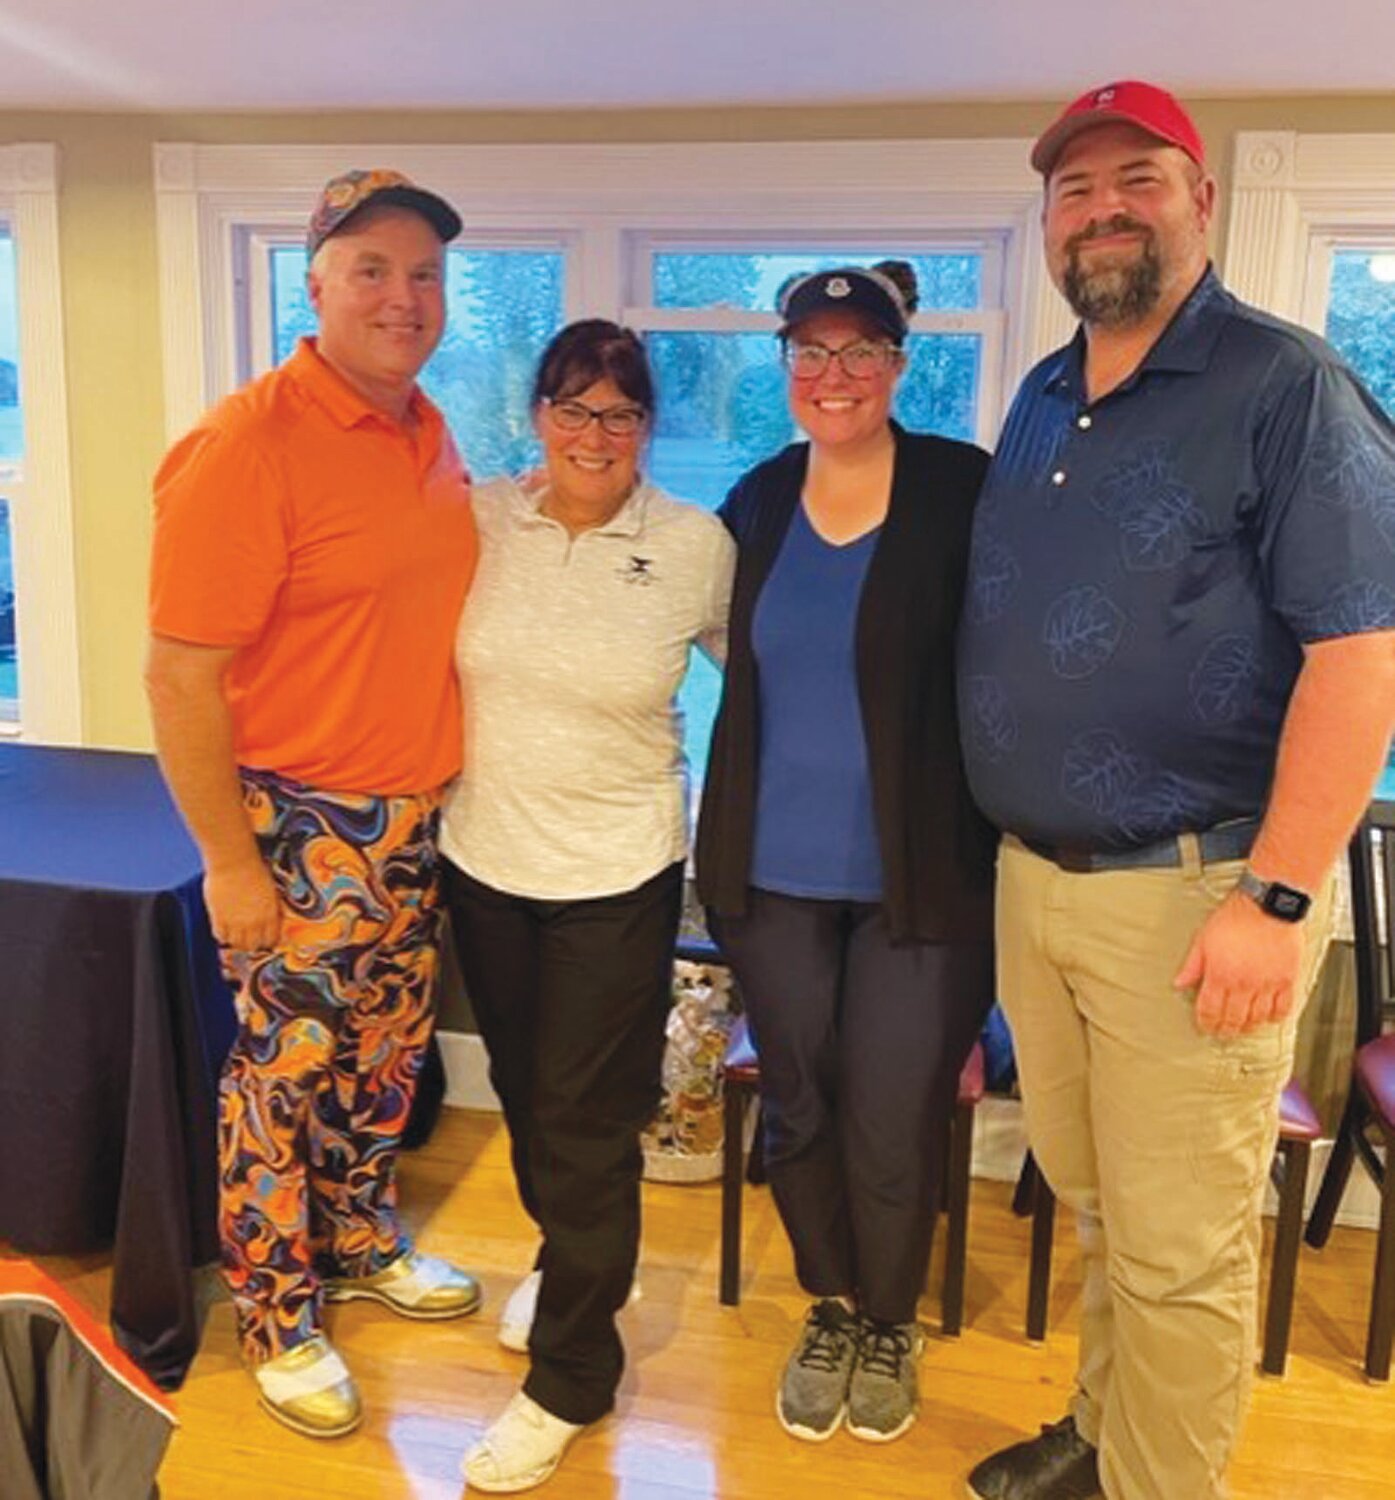 TERRIFIC TEAM: Troy Hewes, Judy DiIorio, Mary Higgins, Jesse Higgins were the tournament’s Gross winners. (Submitted photos)